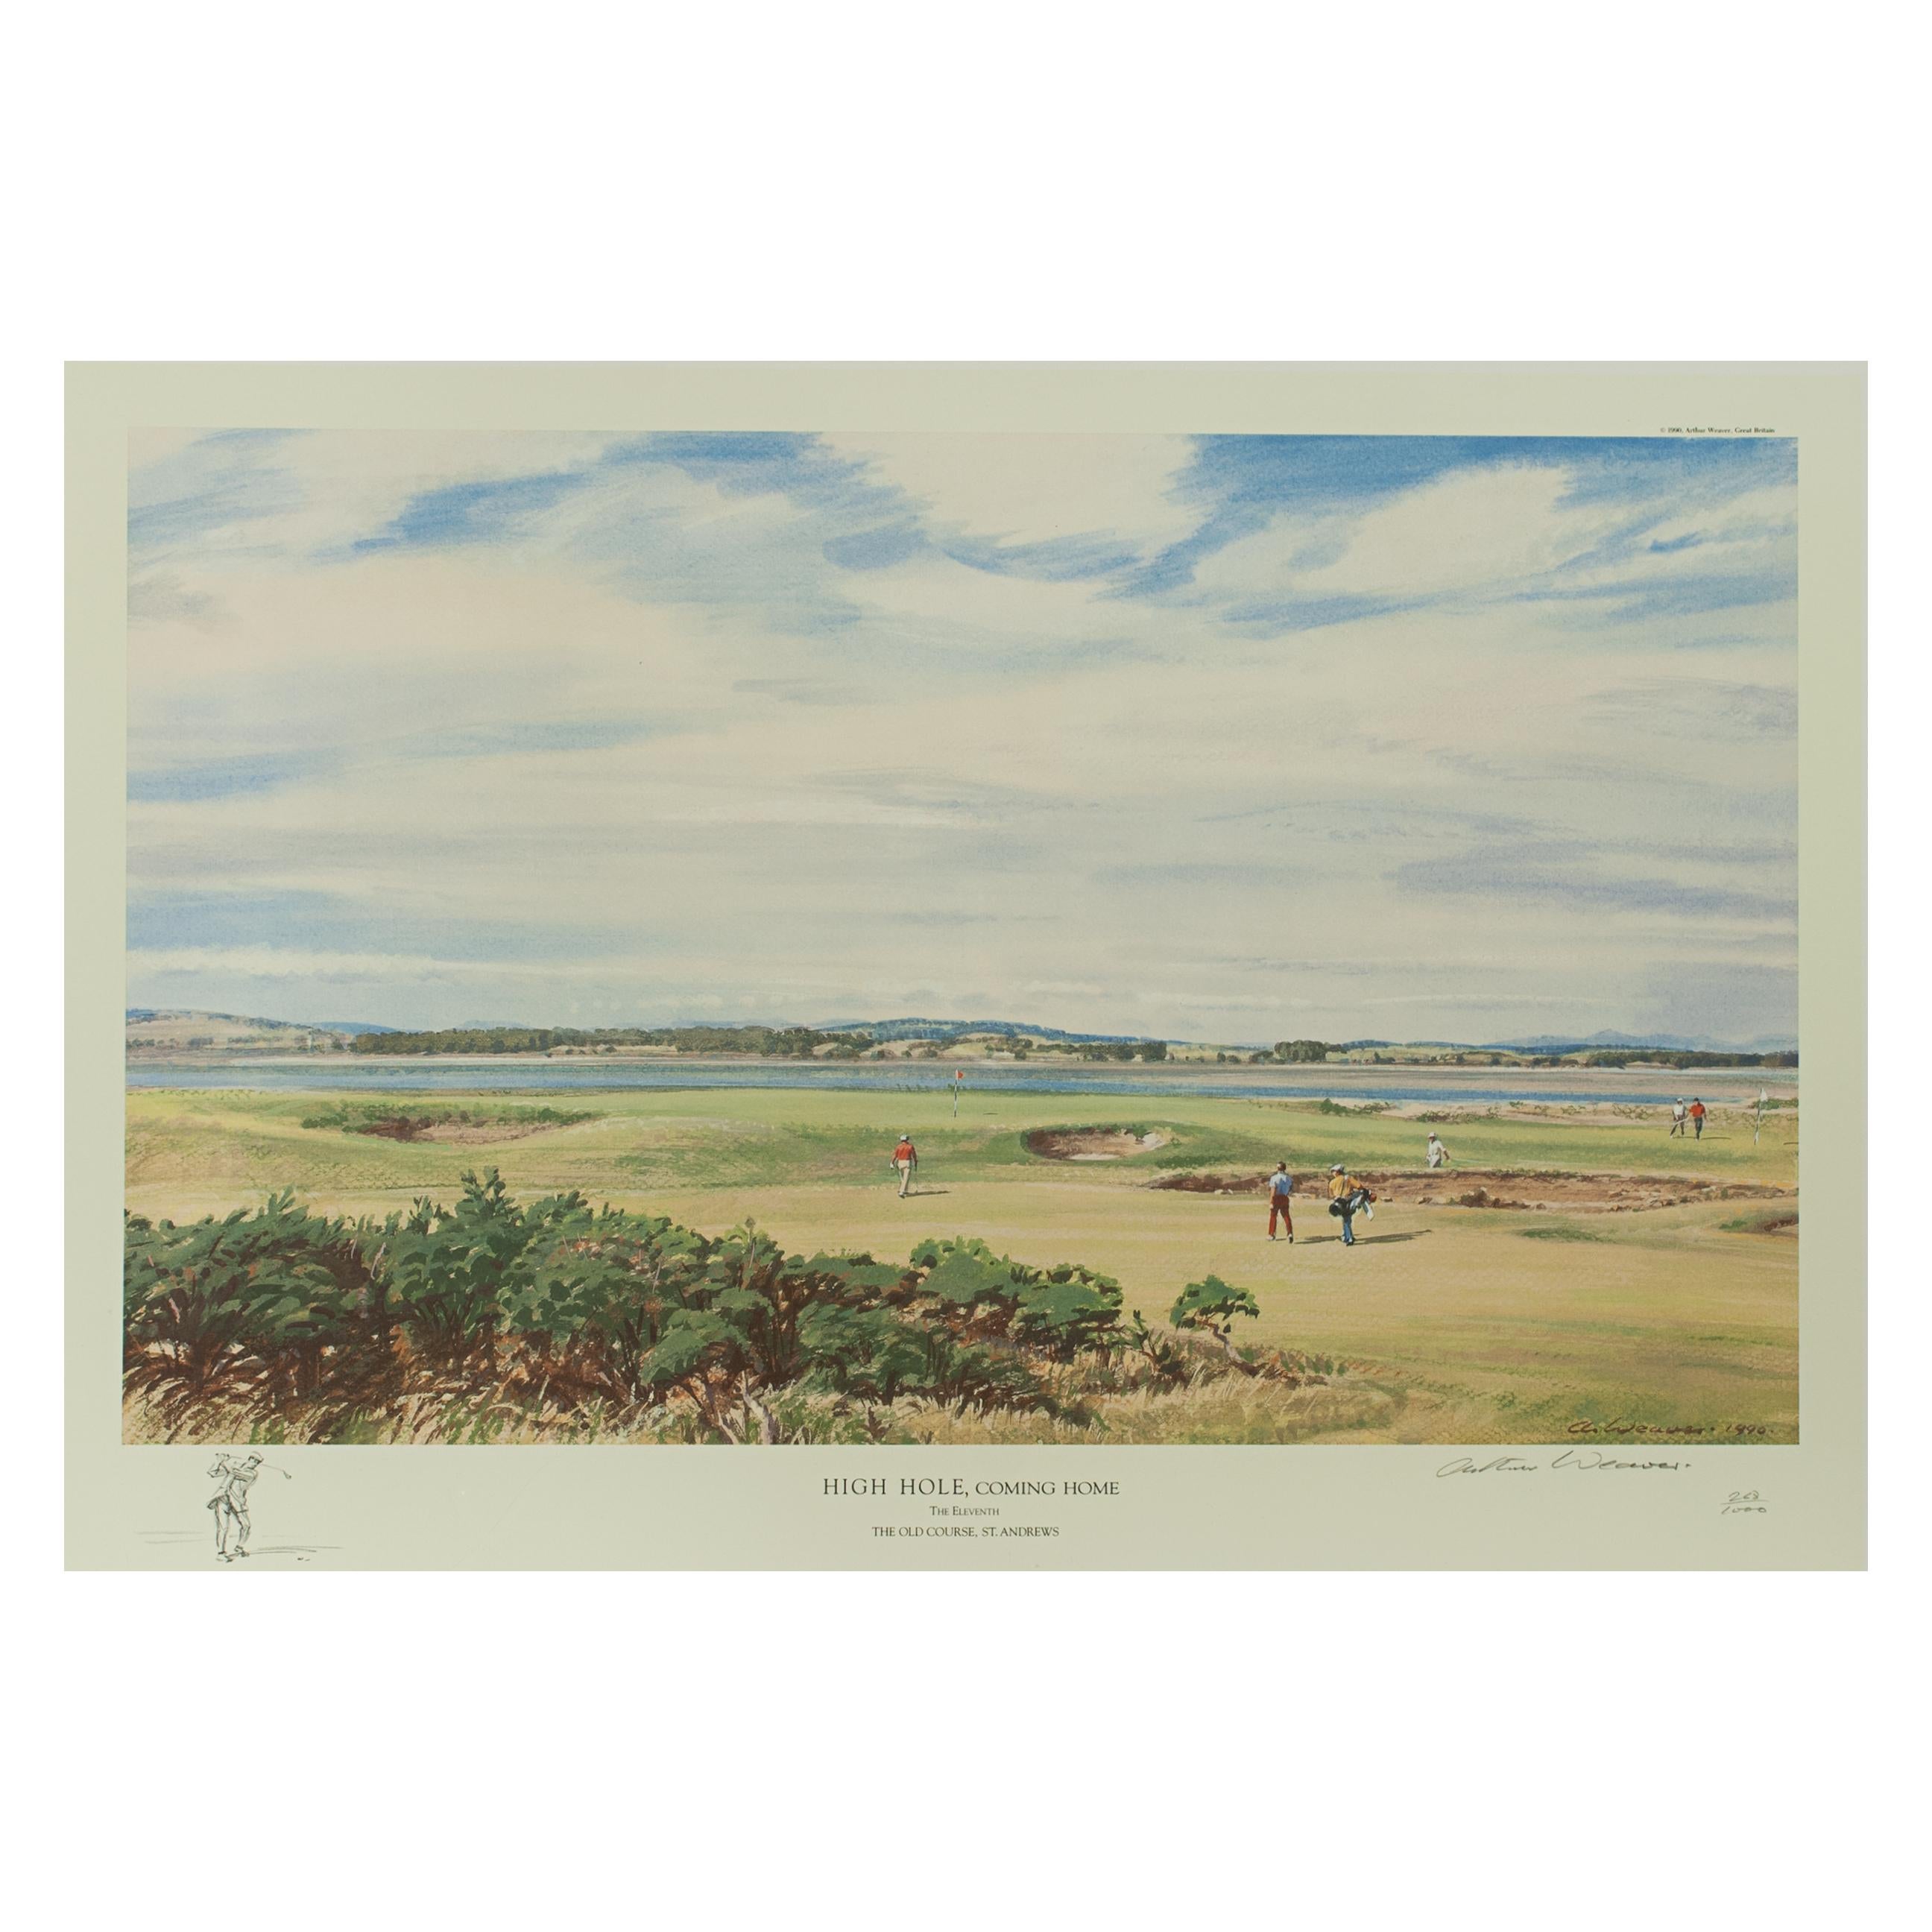 Arthur Weaver Golf Print, High Hole, St Andrews.

A fine print taken from the original art work by Arthur Weaver, entitled 'High Hole, coming home, The Eleventh, The Old Course, St Andrews'. The print is a limited edition, this is No. 268 of 1000.